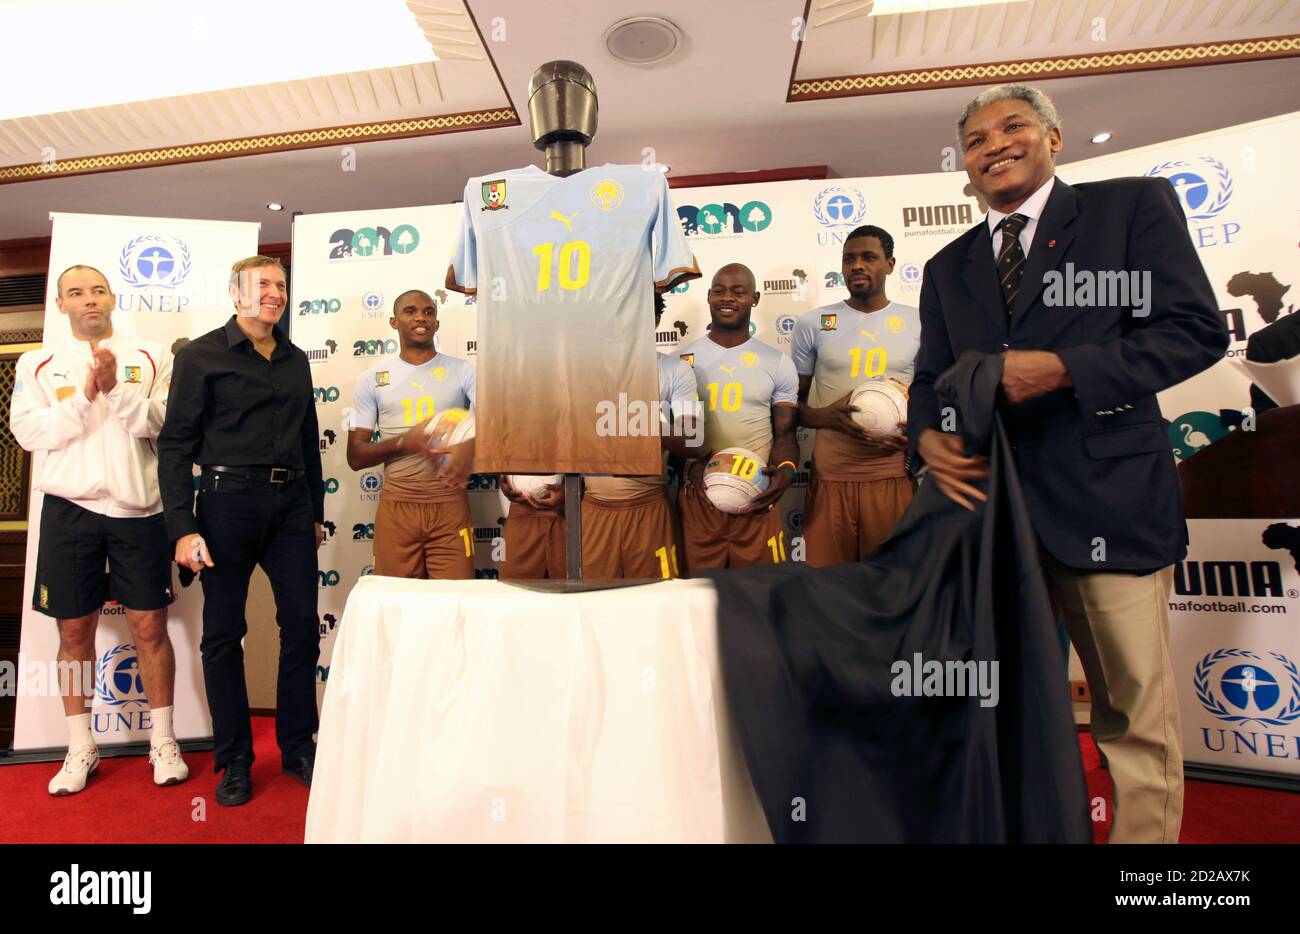 Cameroon Football Federation president Mohammed Iya (R) unveils the PUMA  Africa Unity Replica jersey in Kenya's capital Nairobi, January 6, 2010.  PUMA and the United Nations Environment Programme (UNEP) were joined by